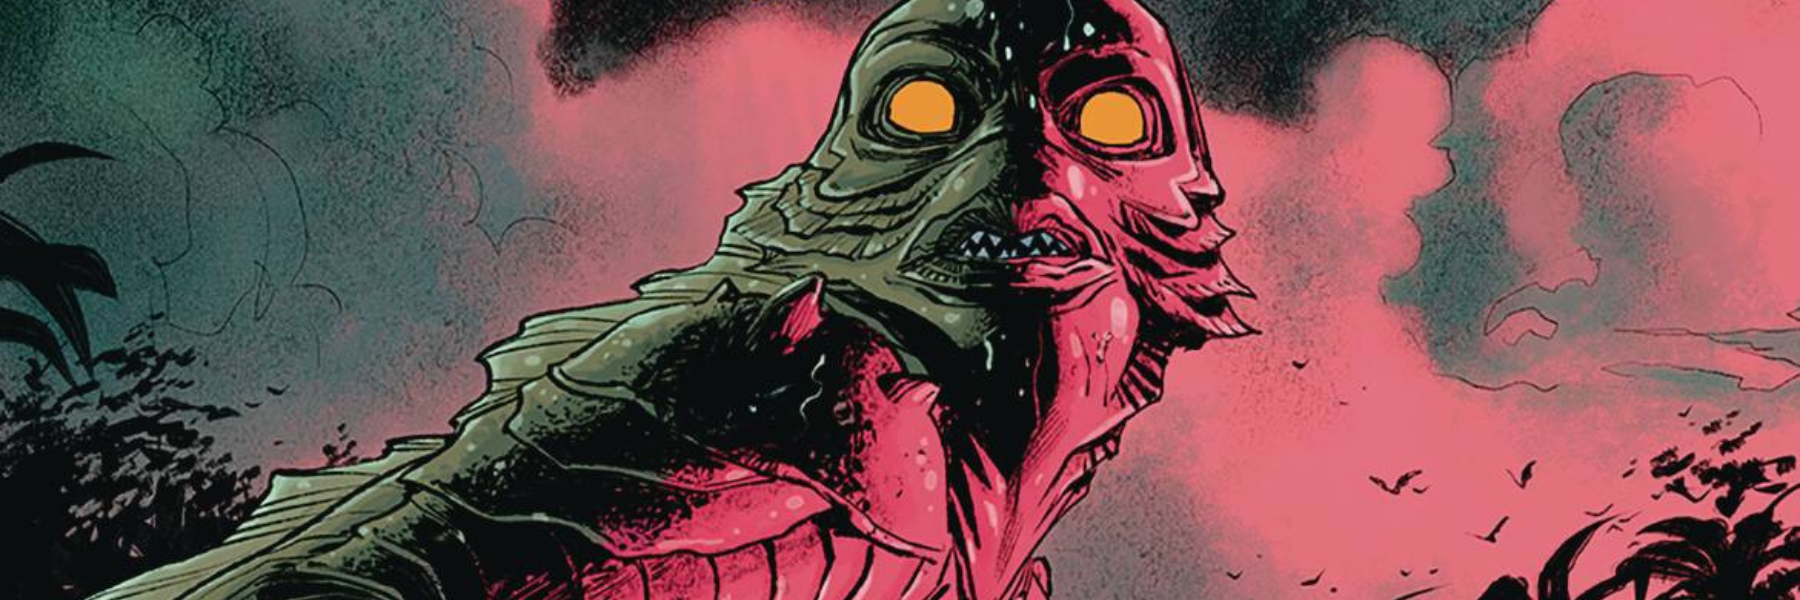 New Series Revives Iconic Monster in Fresh Adventures